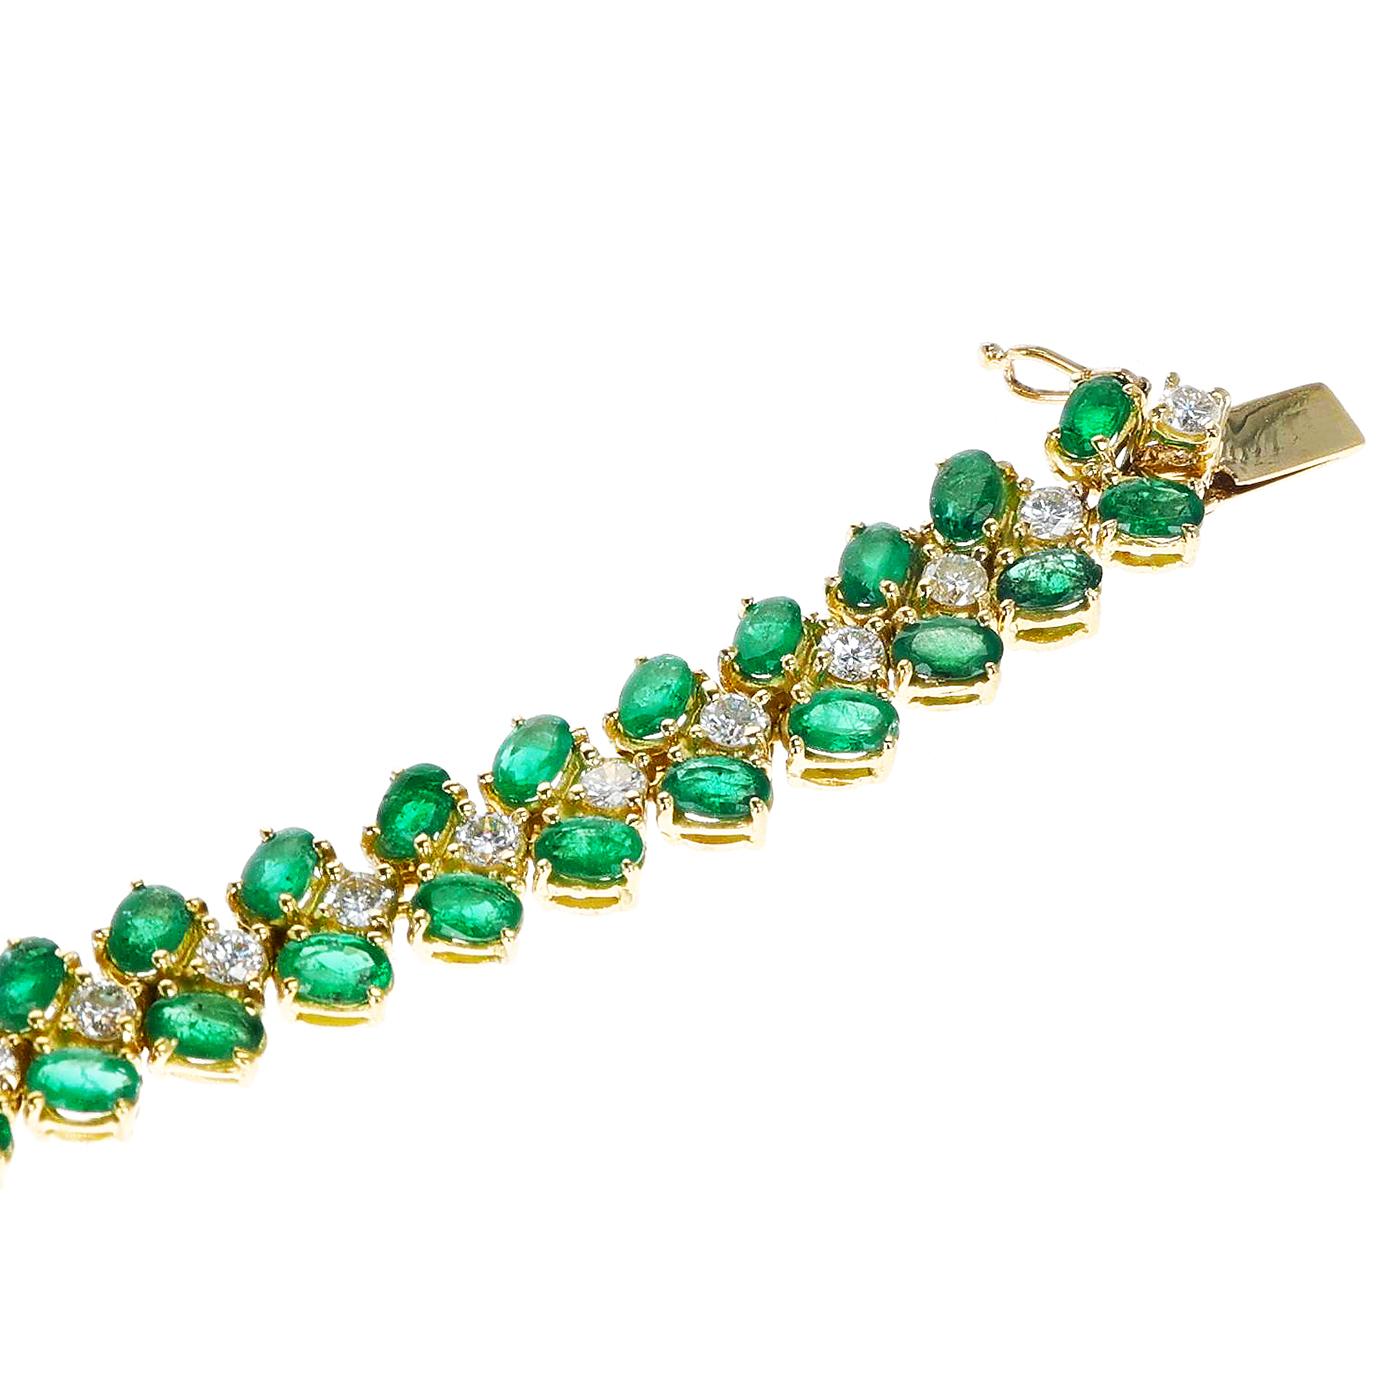 An Estate Bracelet of Moroni Italy with Oval Emeralds and Round Diamonds made in 18 Karat Yellow Gold. The length of the bracelet is 7.25.